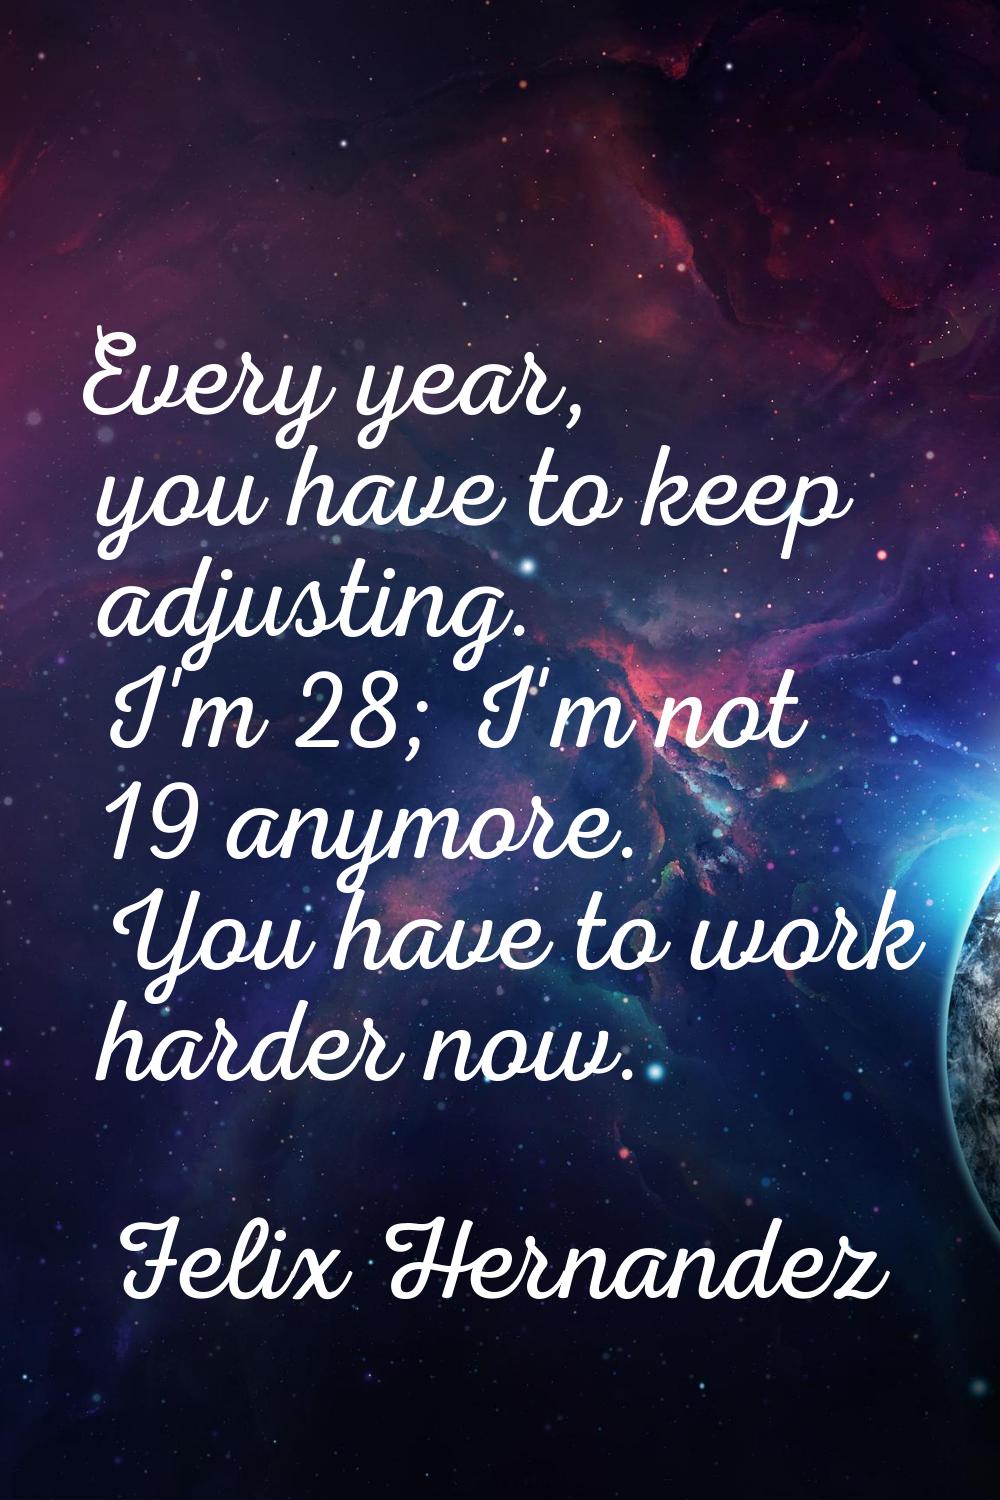 Every year, you have to keep adjusting. I'm 28; I'm not 19 anymore. You have to work harder now.